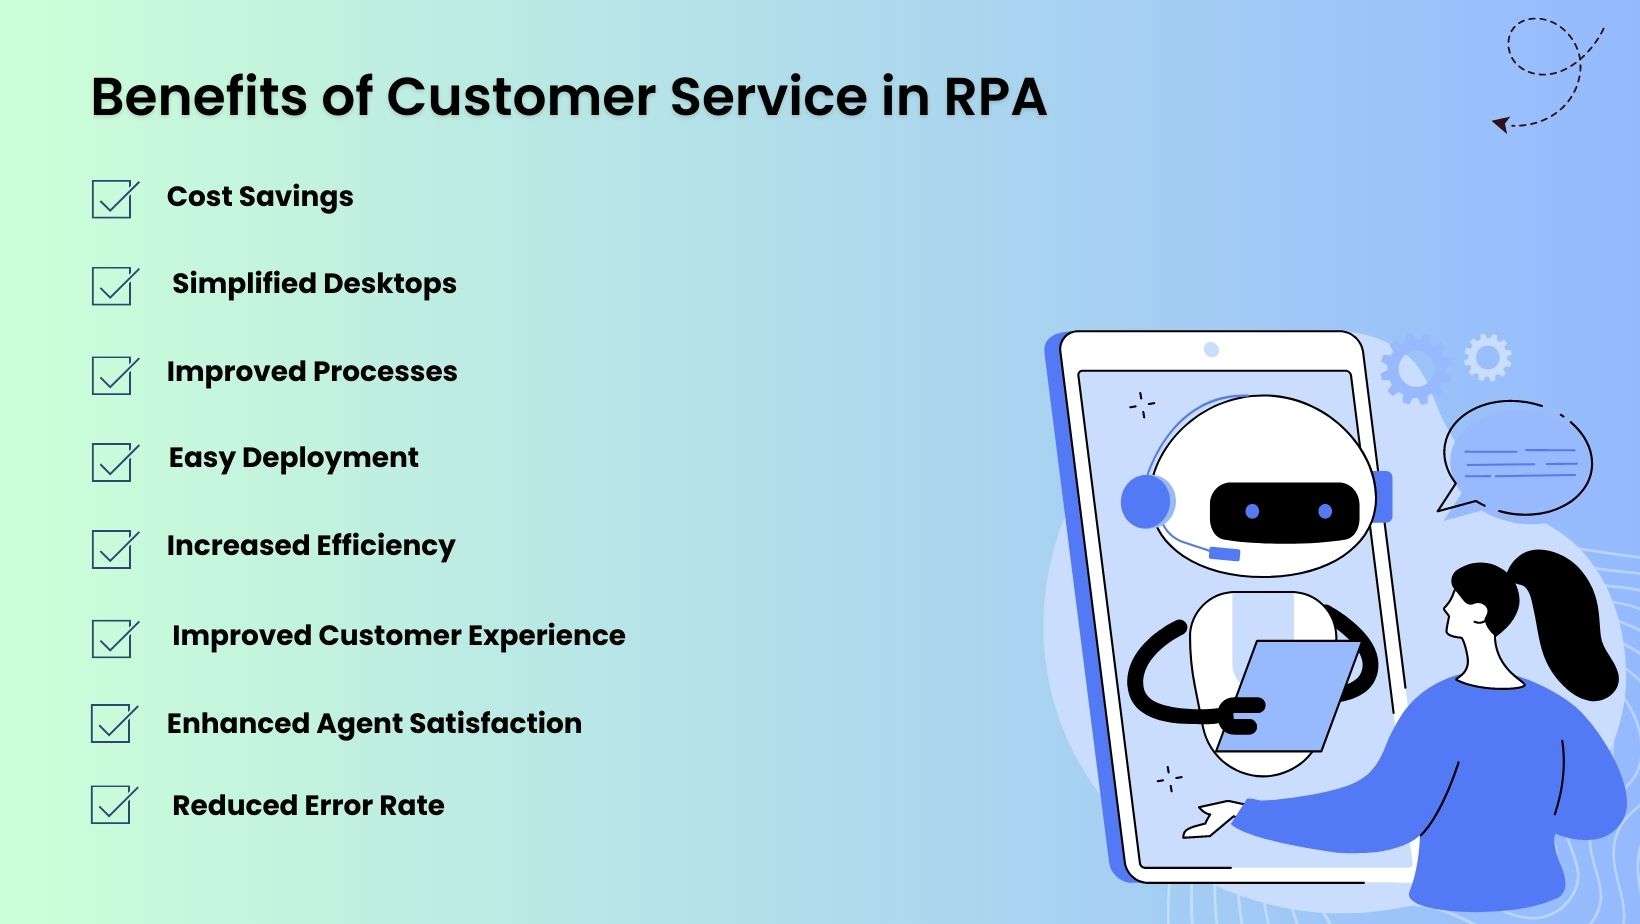 Benefits of  RPA in Customer Services